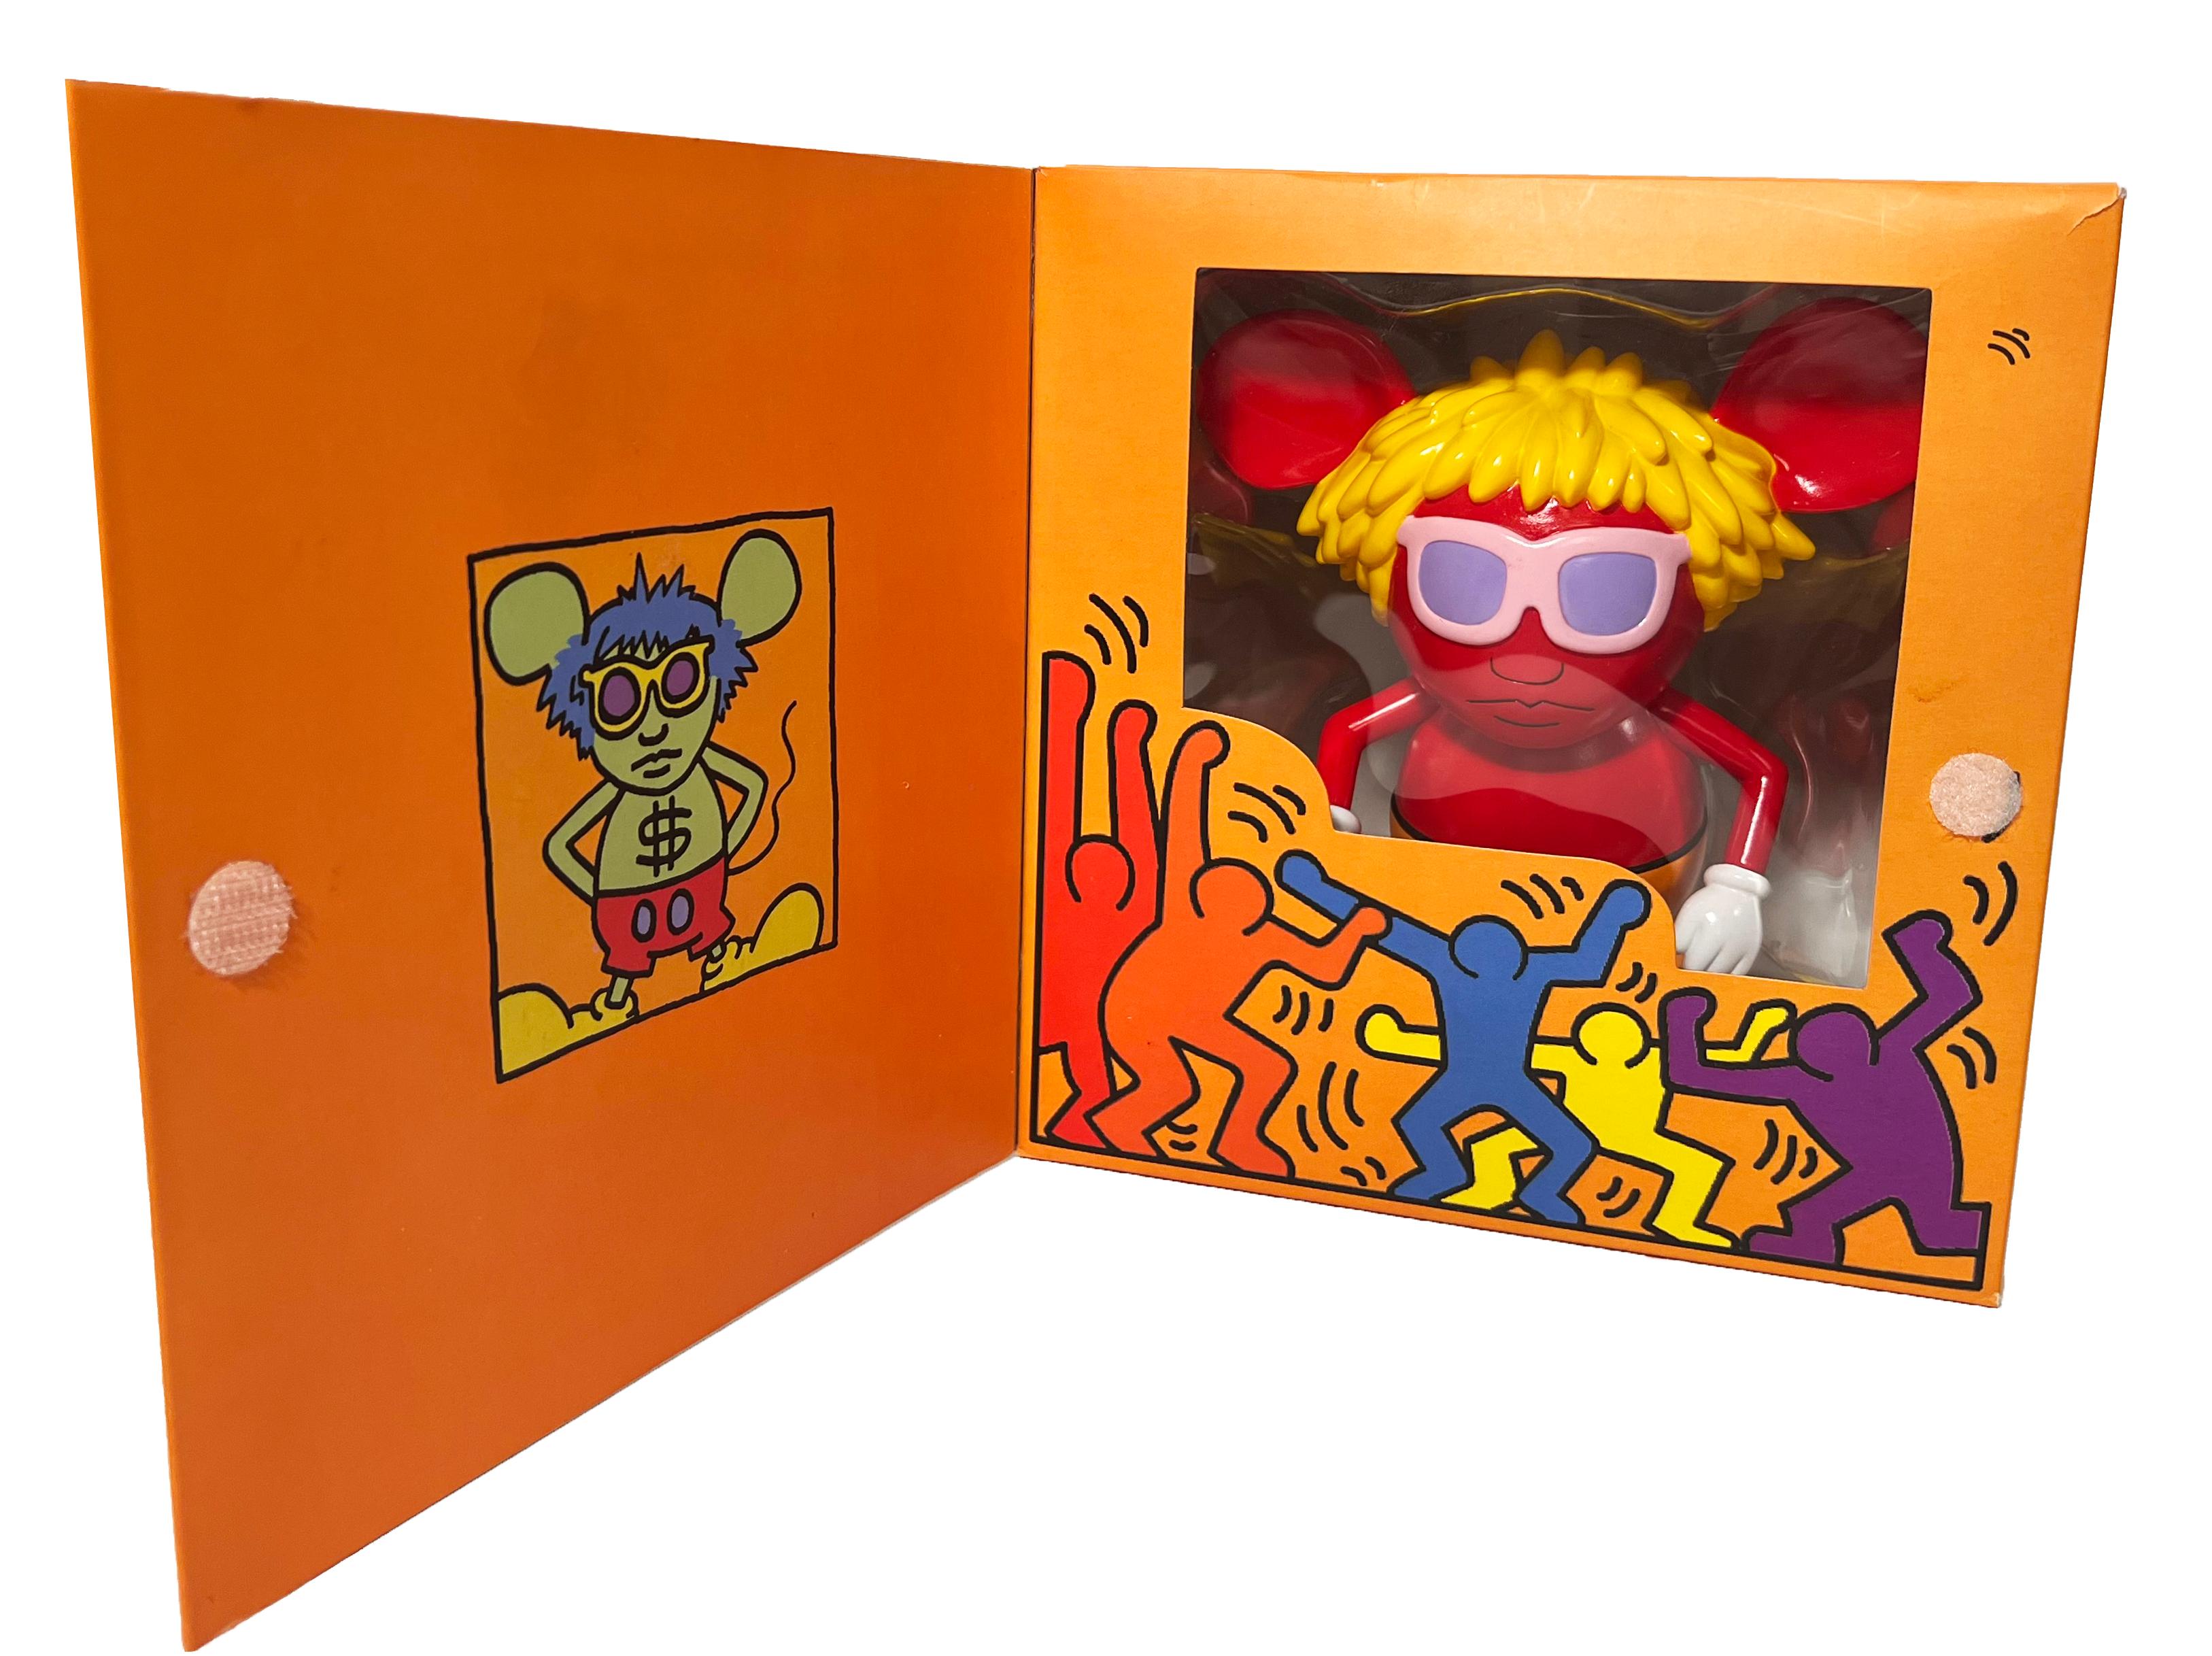 Keith Haring Andy Warhol art toy (Keith Haring Andy Mouse)  - Pop Art Sculpture by (after) Keith Haring